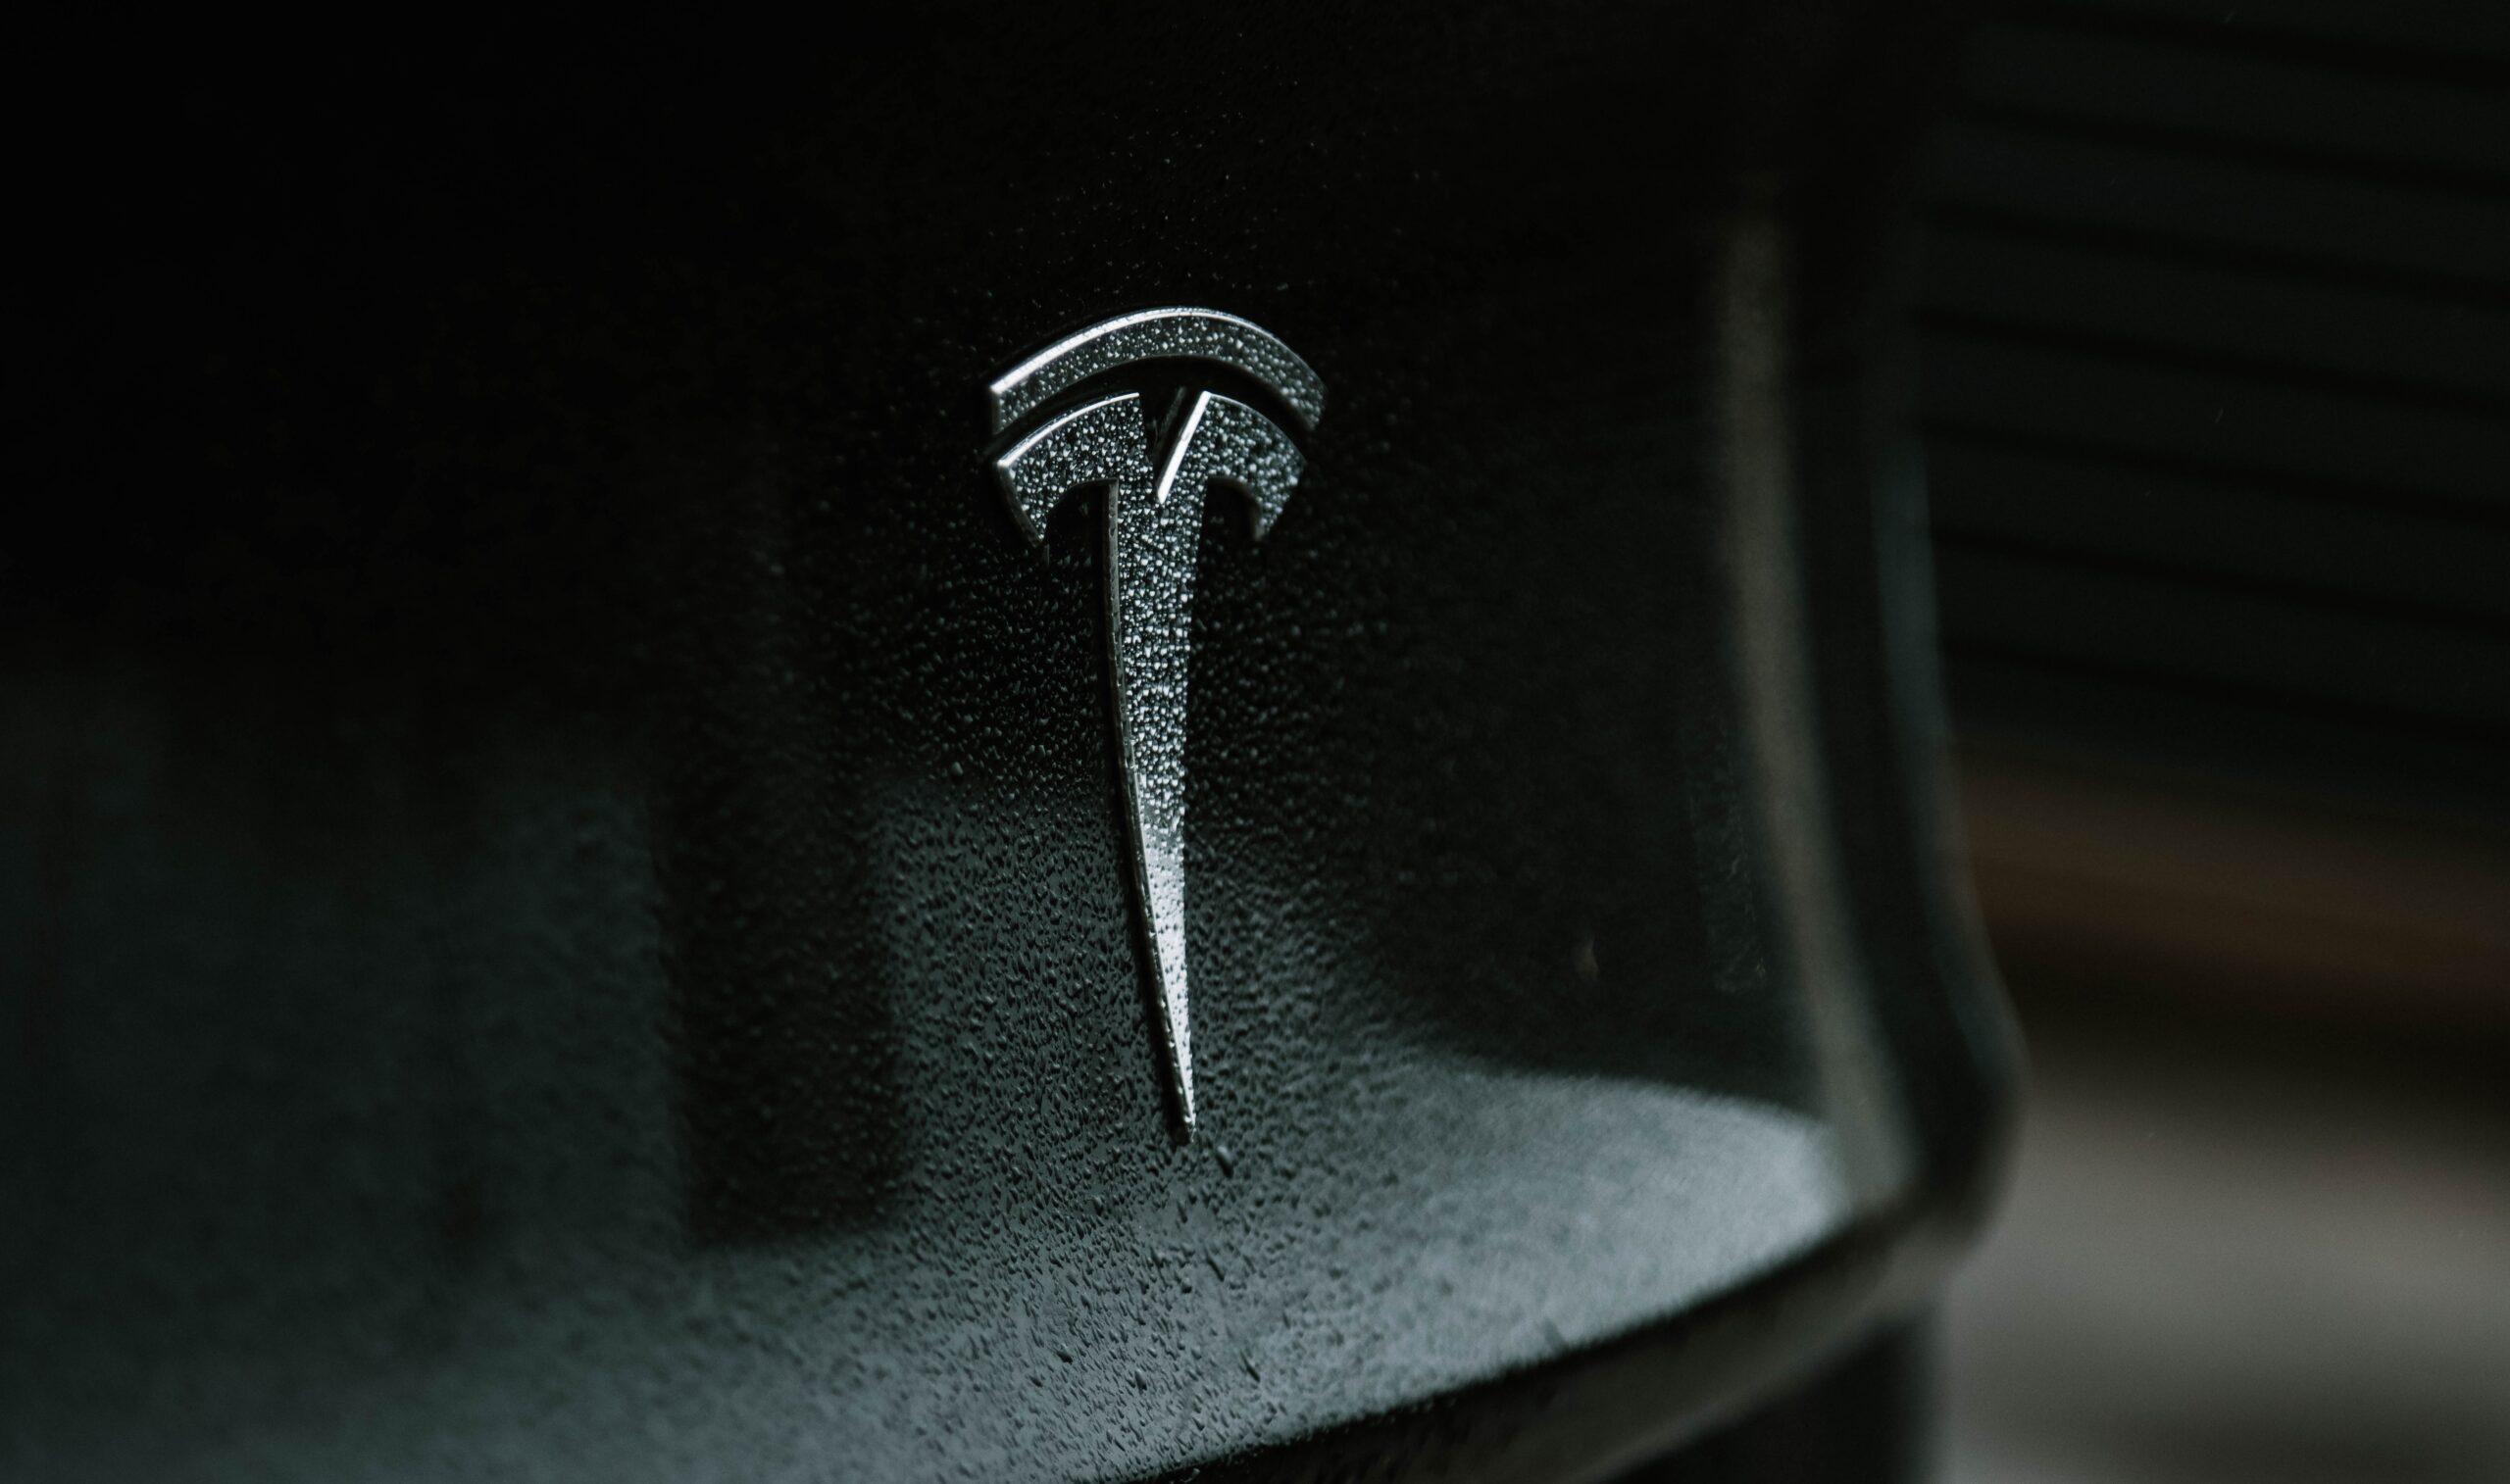 Up close image of the Tesla logo as part of an article about iconic logos.